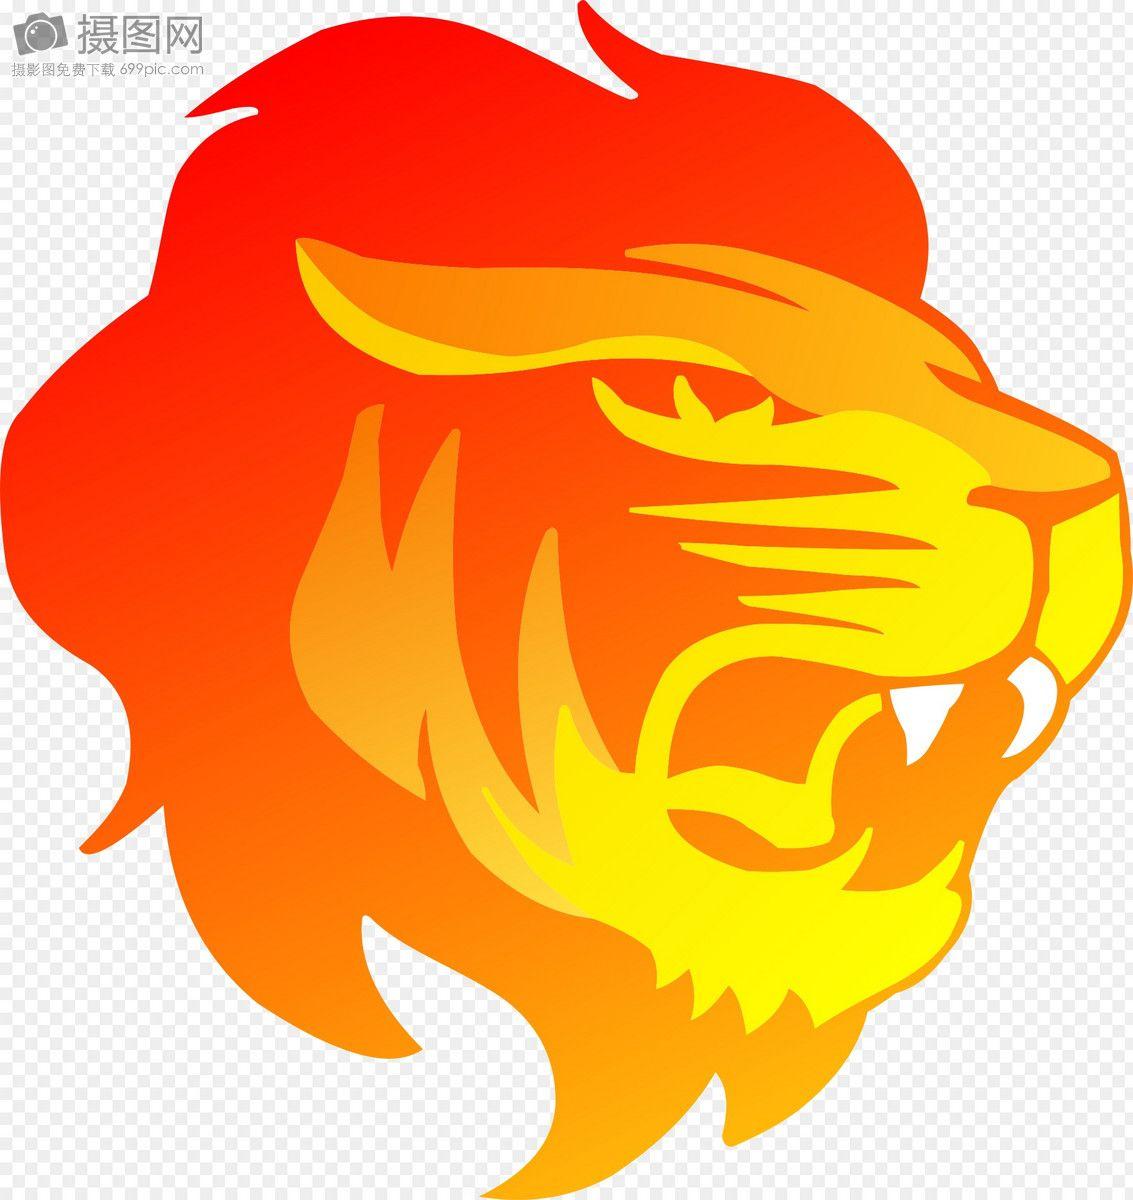 Red Lion Head Logo - A red lions head graphics image_picture free download ...